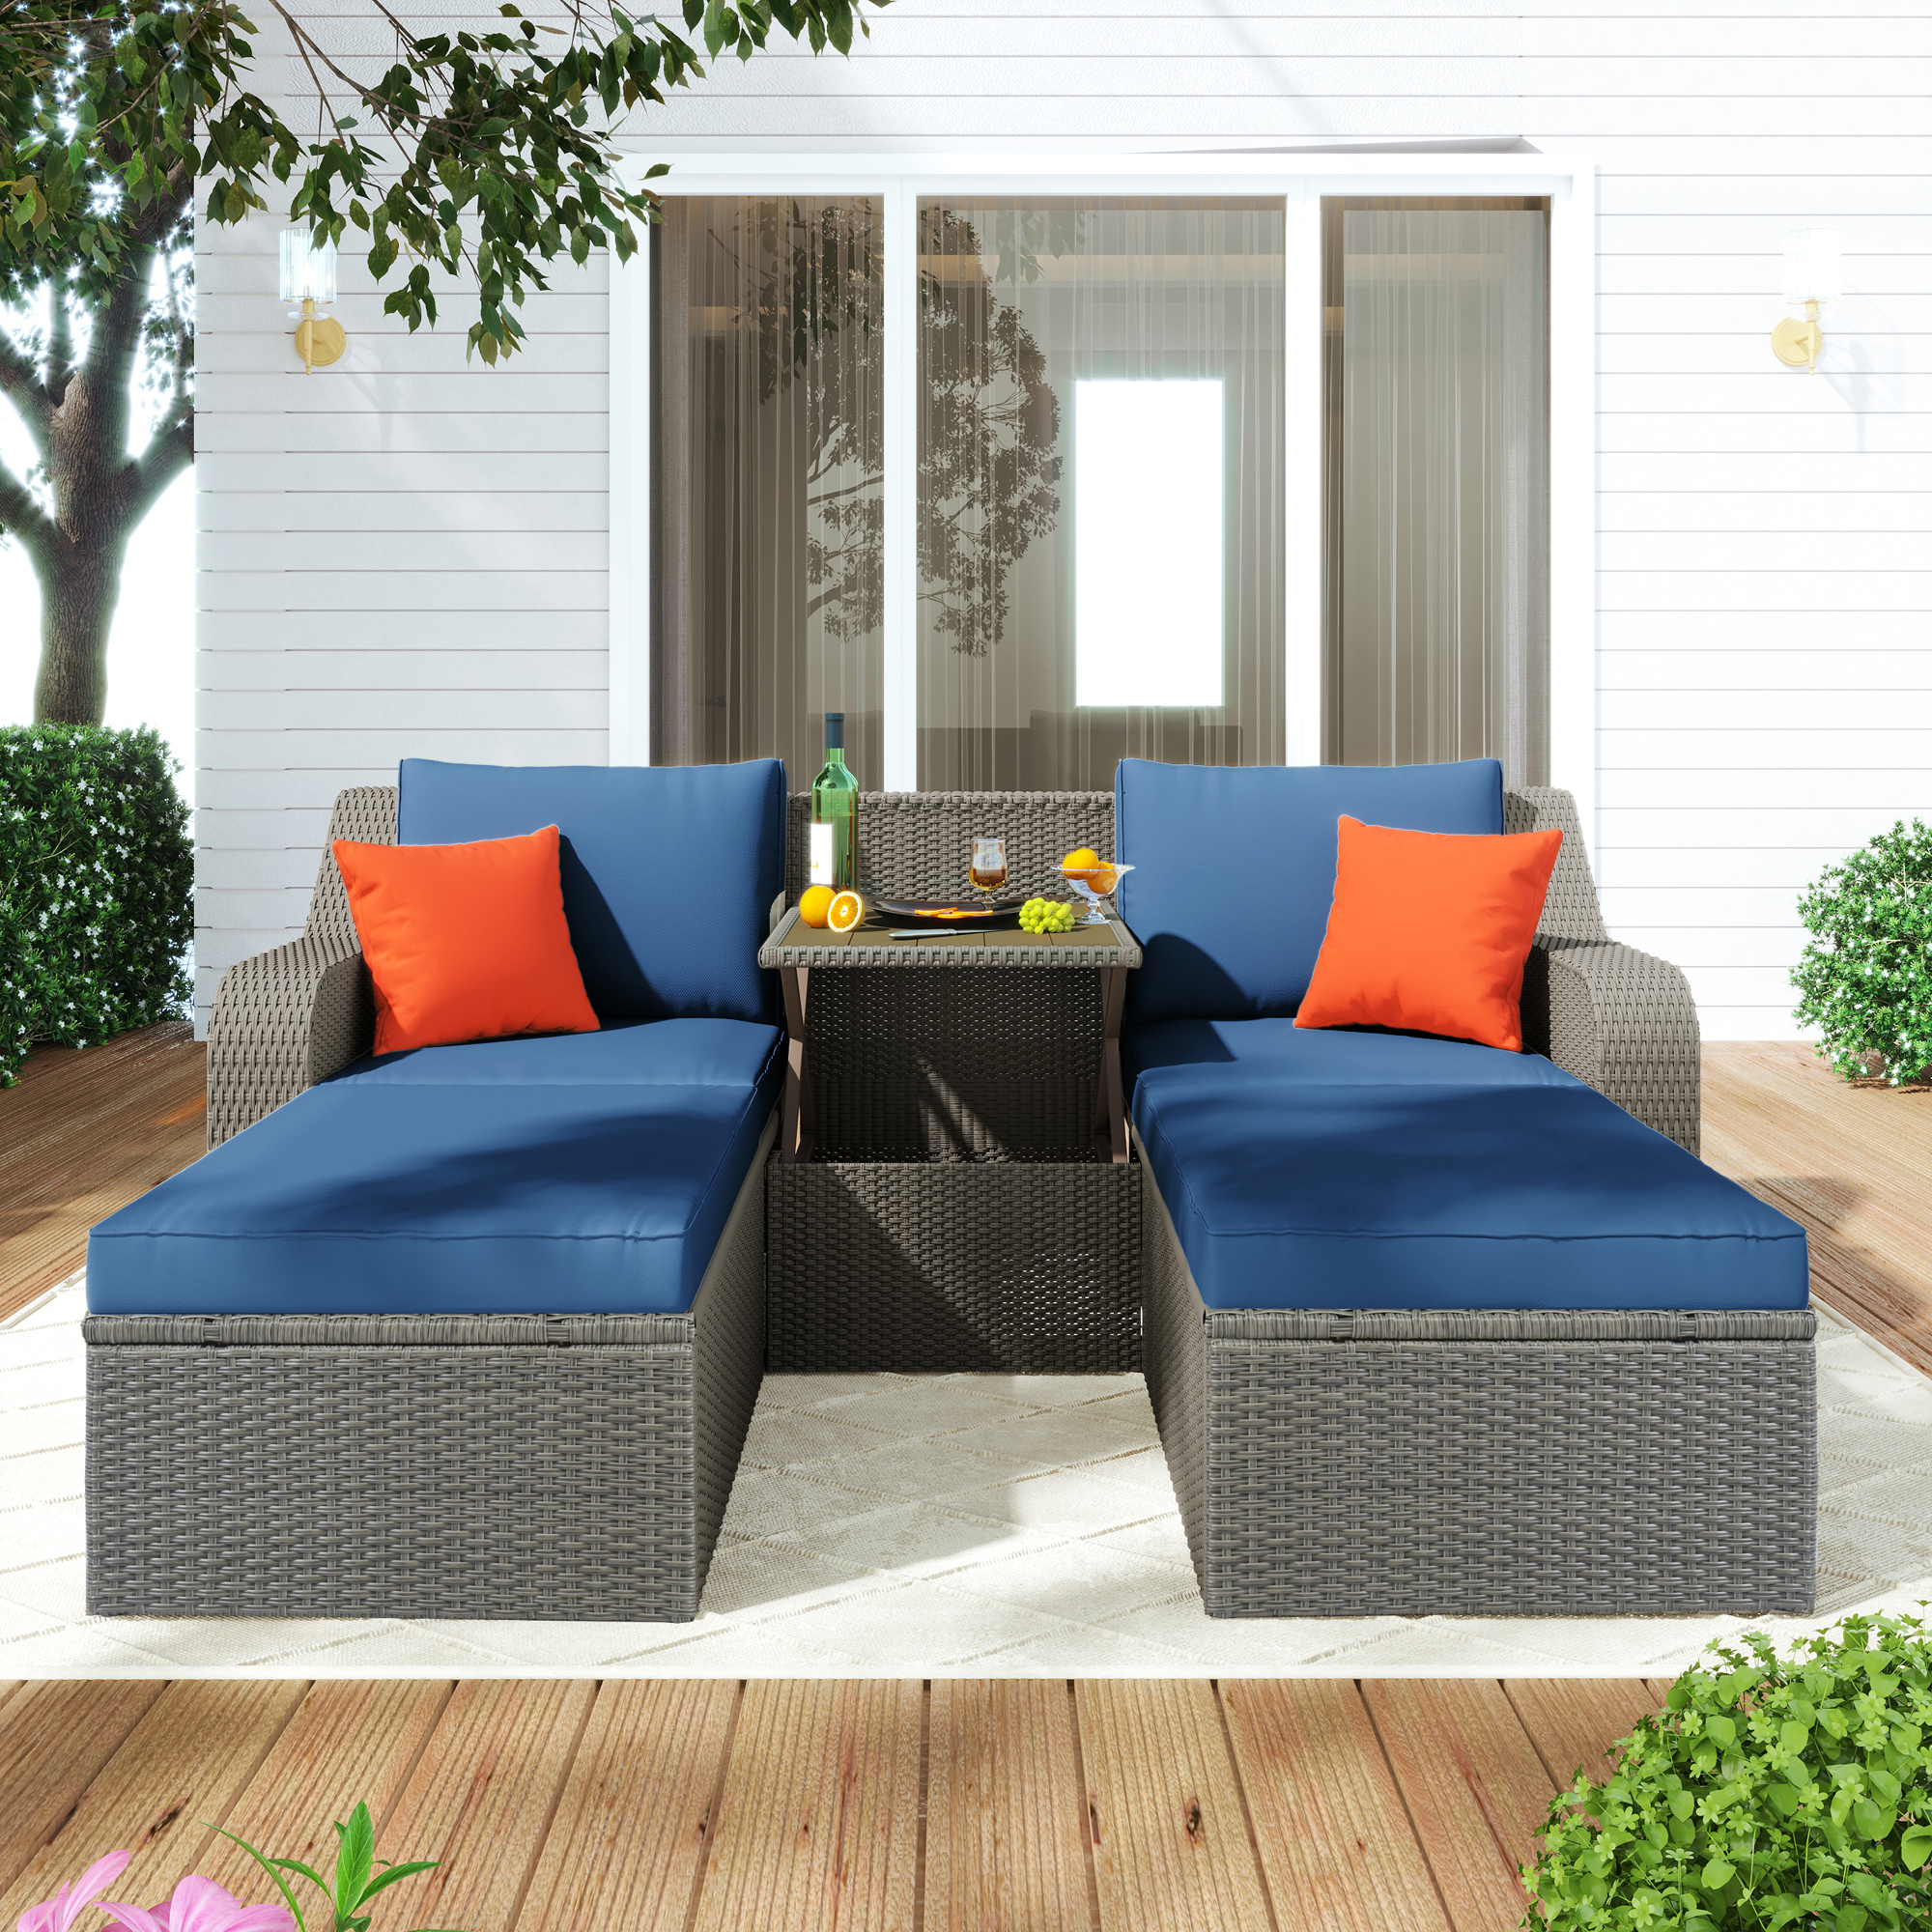 Gray Wicker Patio Seating Sets, SESSLIFE 3-Piece Outdoor Sectional Sofa Set with Loveseat and Soft Cushions, All-Weather Outdoor Table and Chairs Set - image 1 of 9